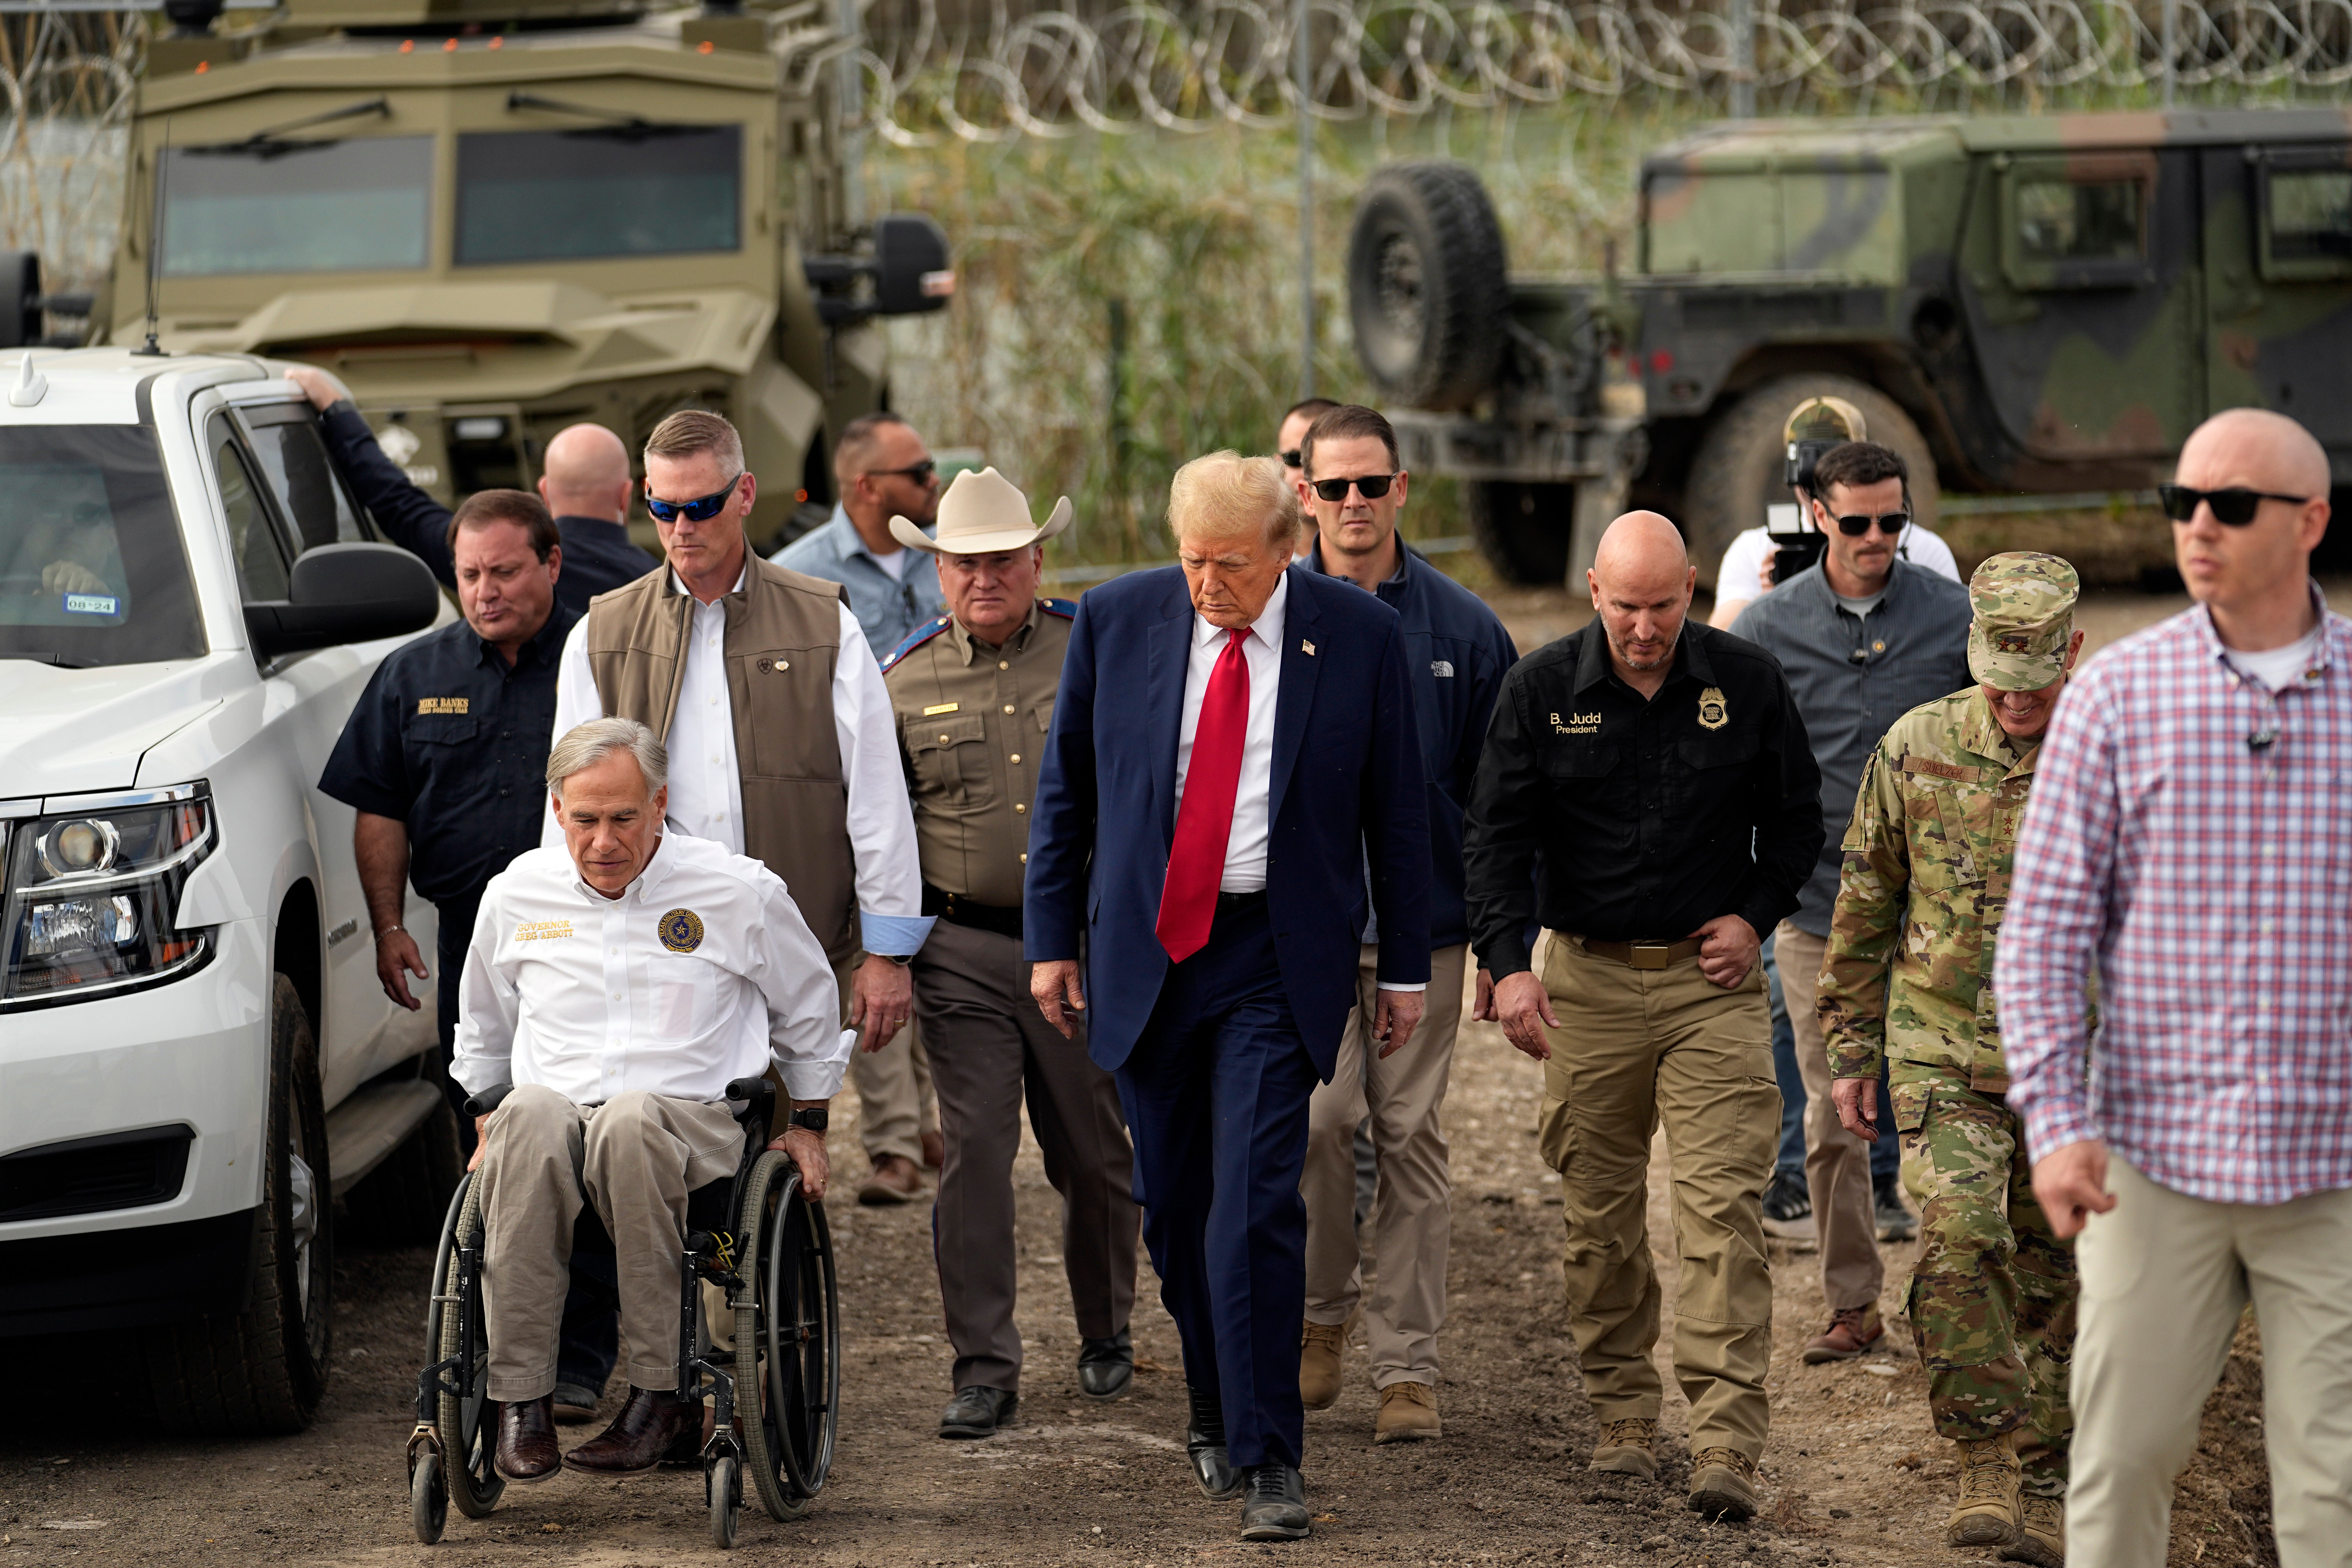 The former president, speaking from the border in Eagle Pass, Texas, said that there were ‘millions of people from places unknown’ coming into the US